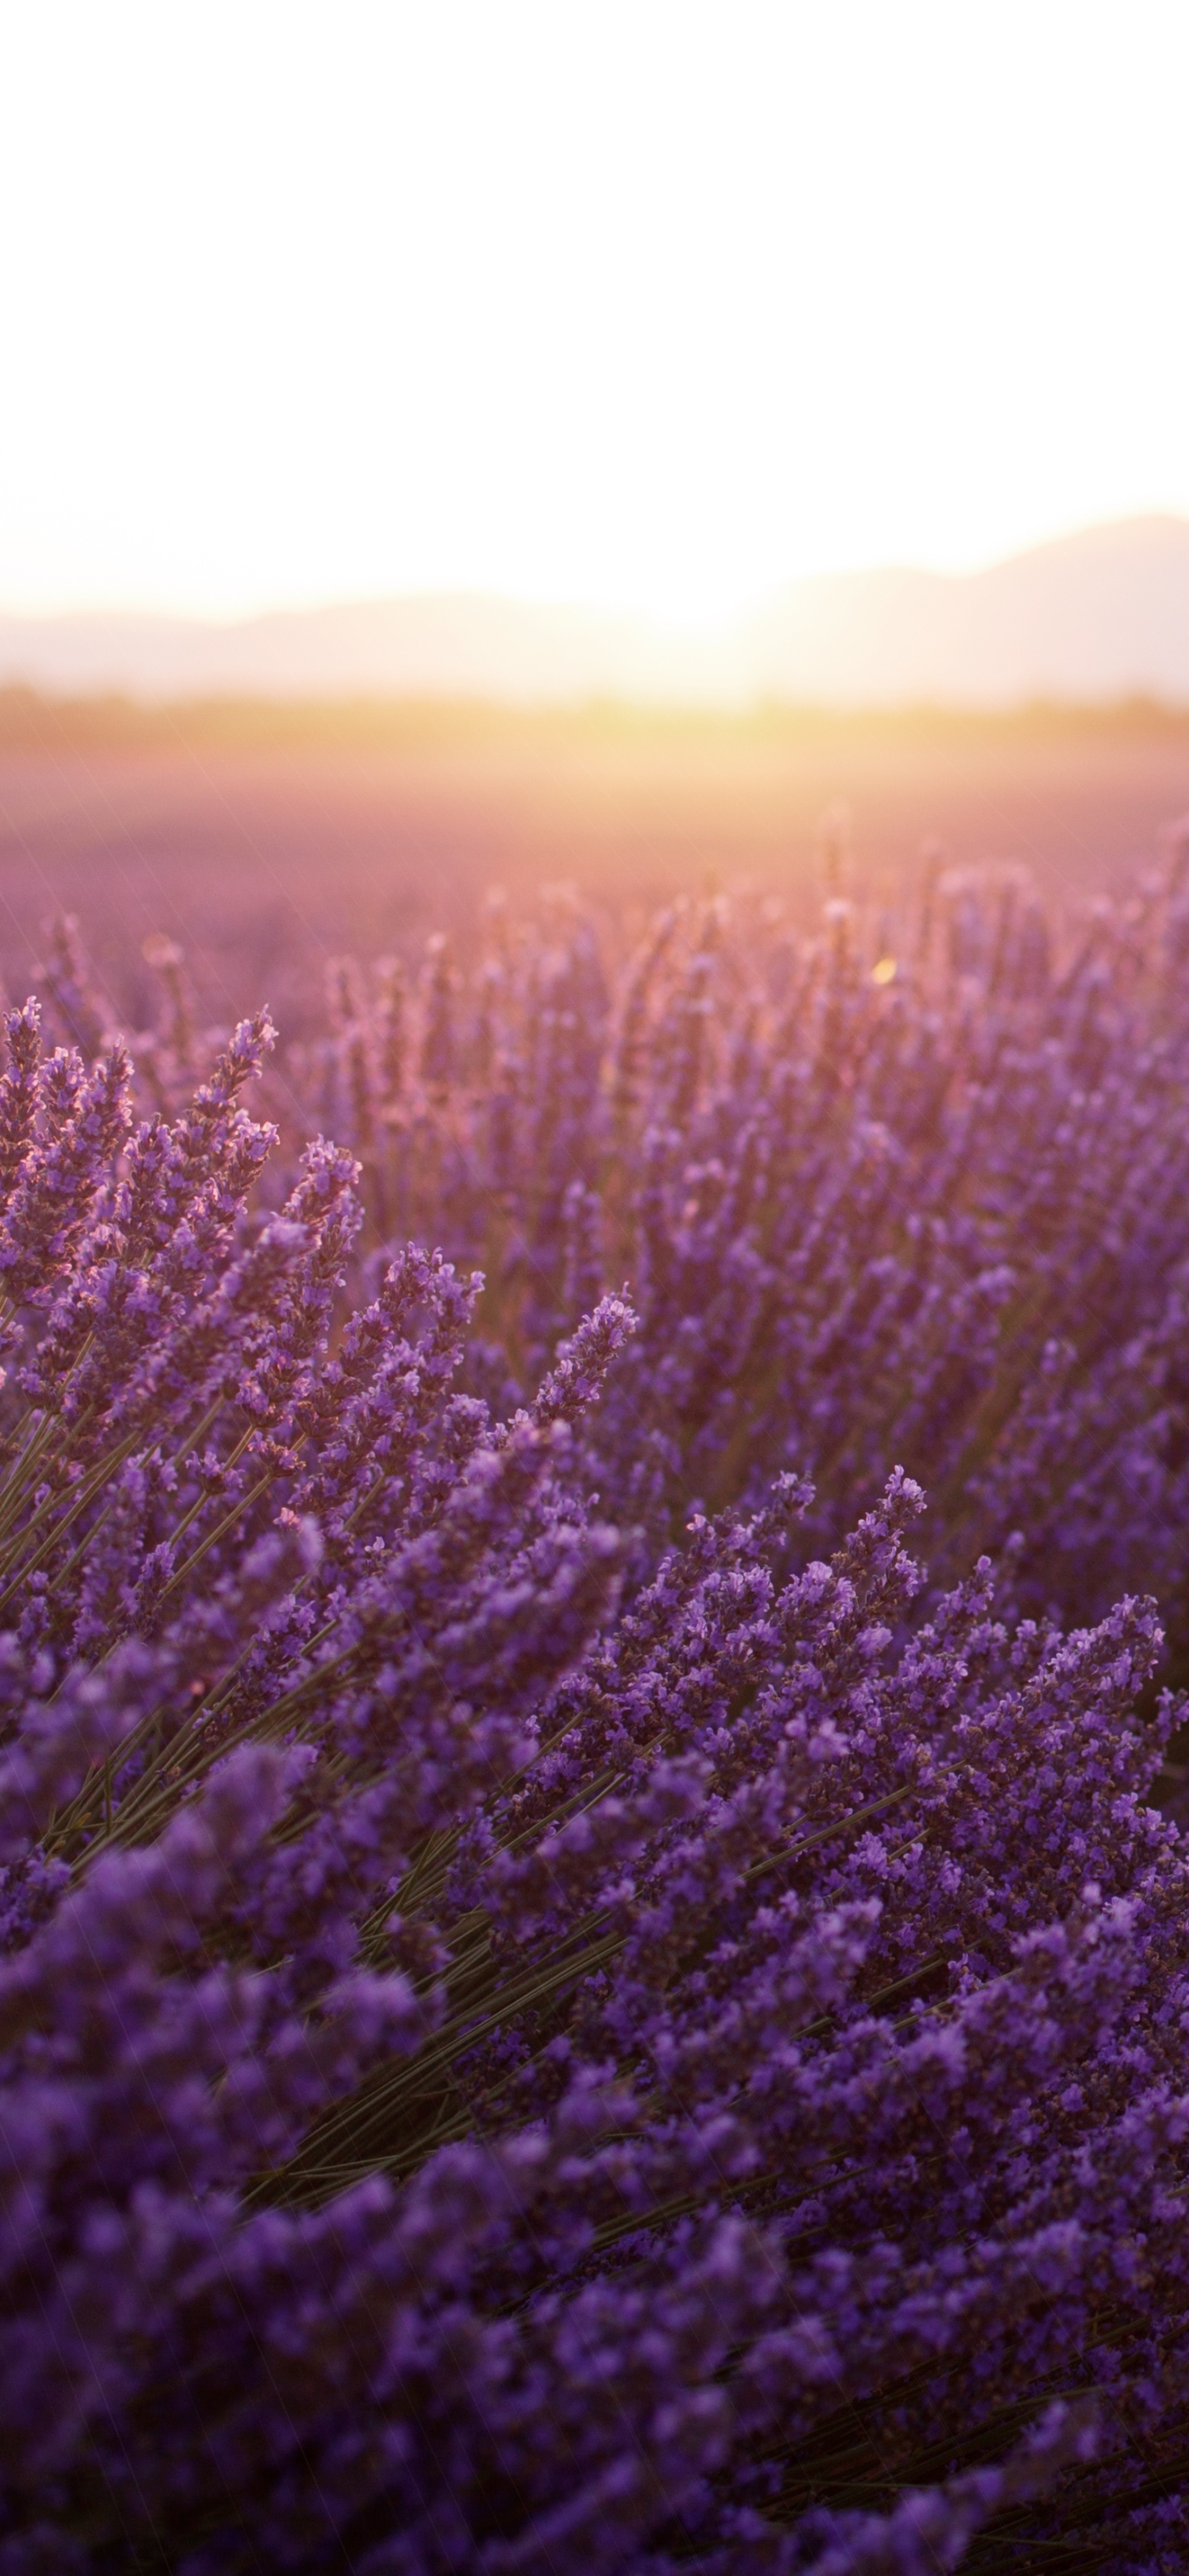 Lavender field Stock Photos Royalty Free Lavender field Images   Depositphotos